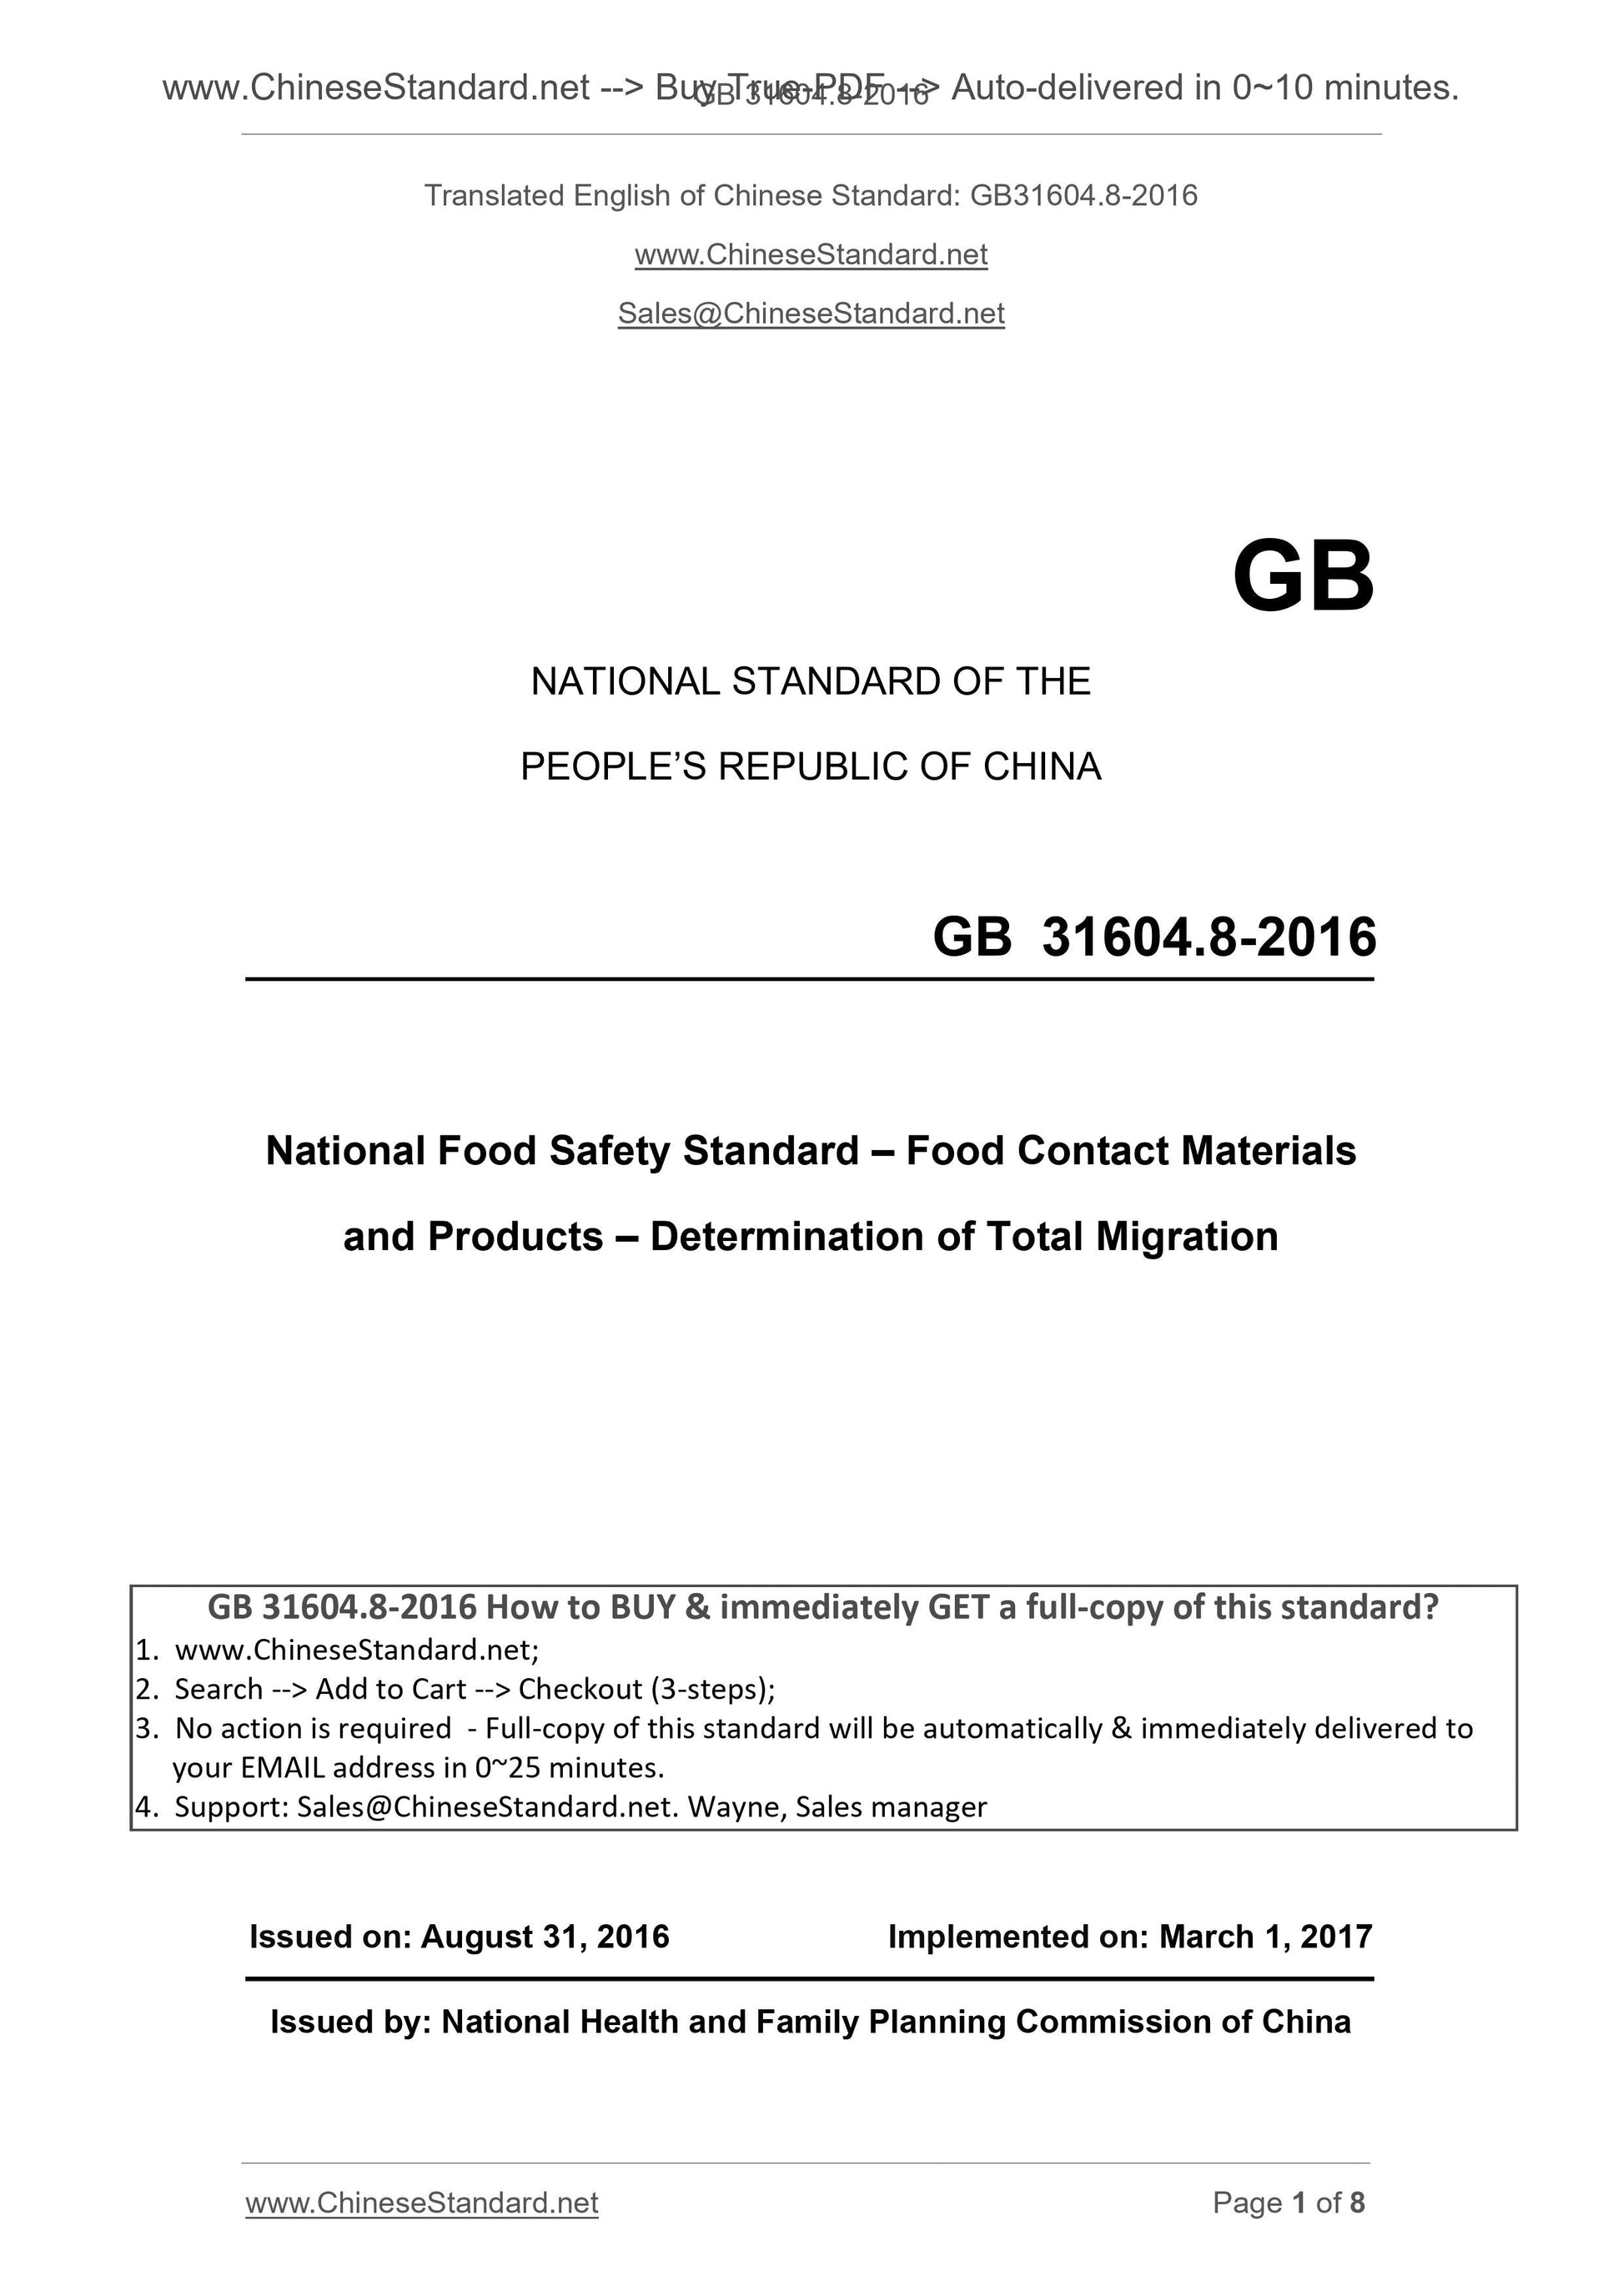 GB 31604.8-2016 Page 1